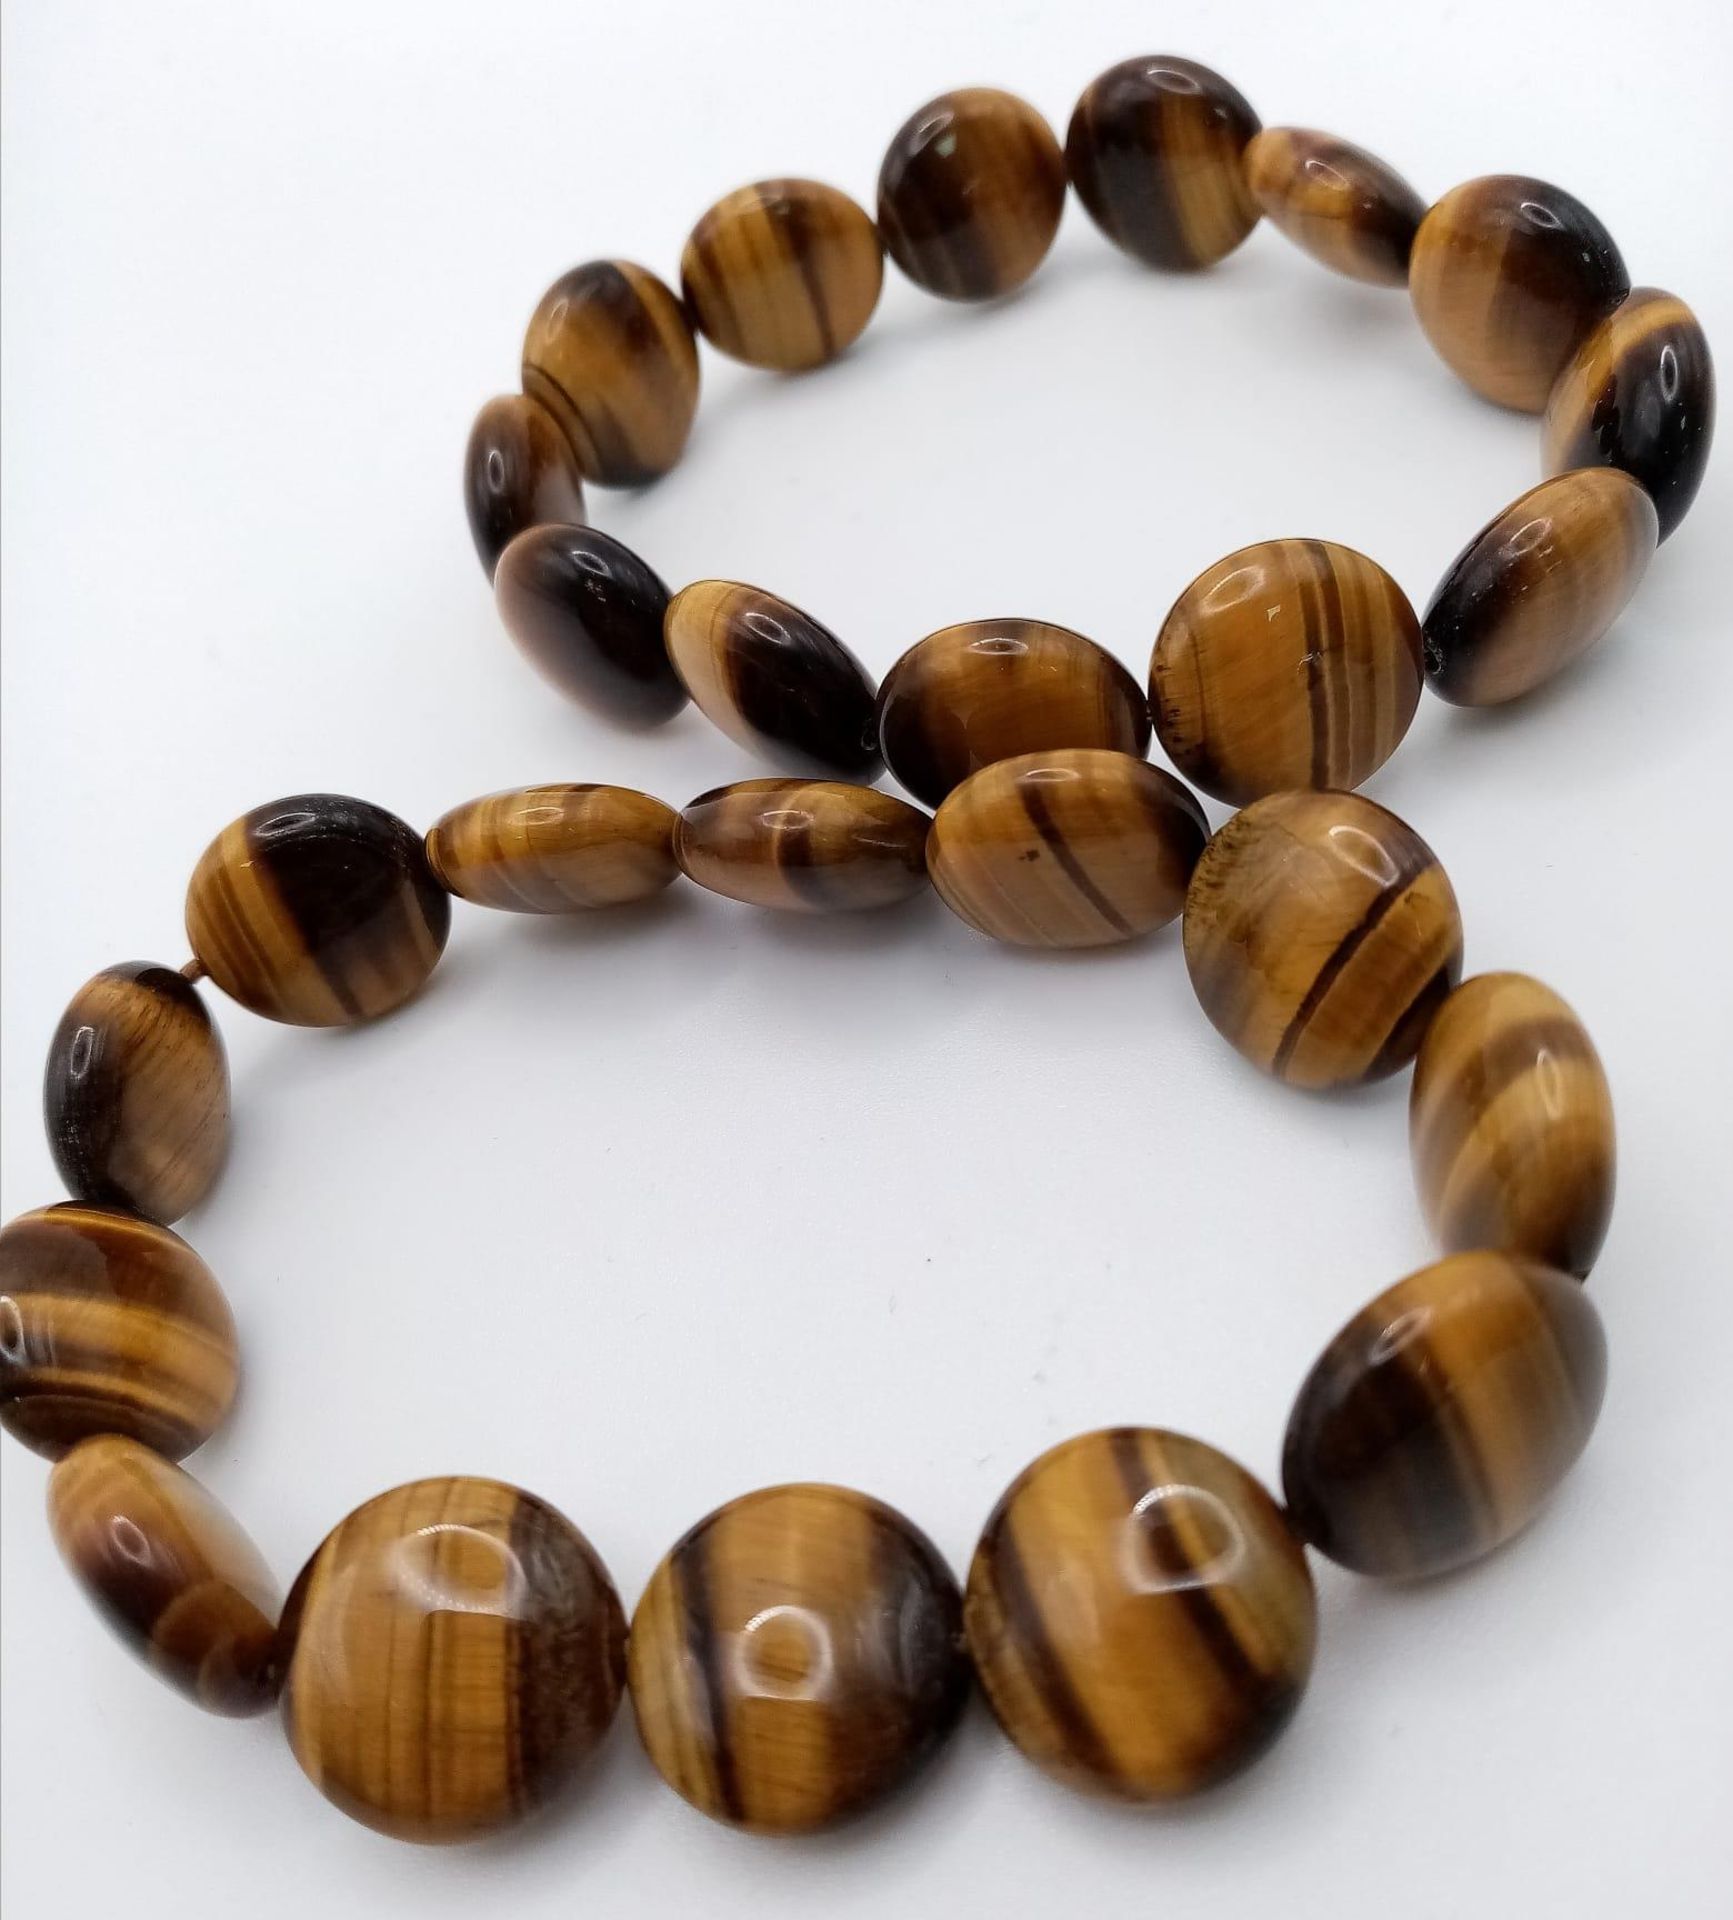 Two Ex Display Tigers Eye Stretch Fit Bracelets. 6cm Inner width at rest. 1.4cm Wide. Each weigh